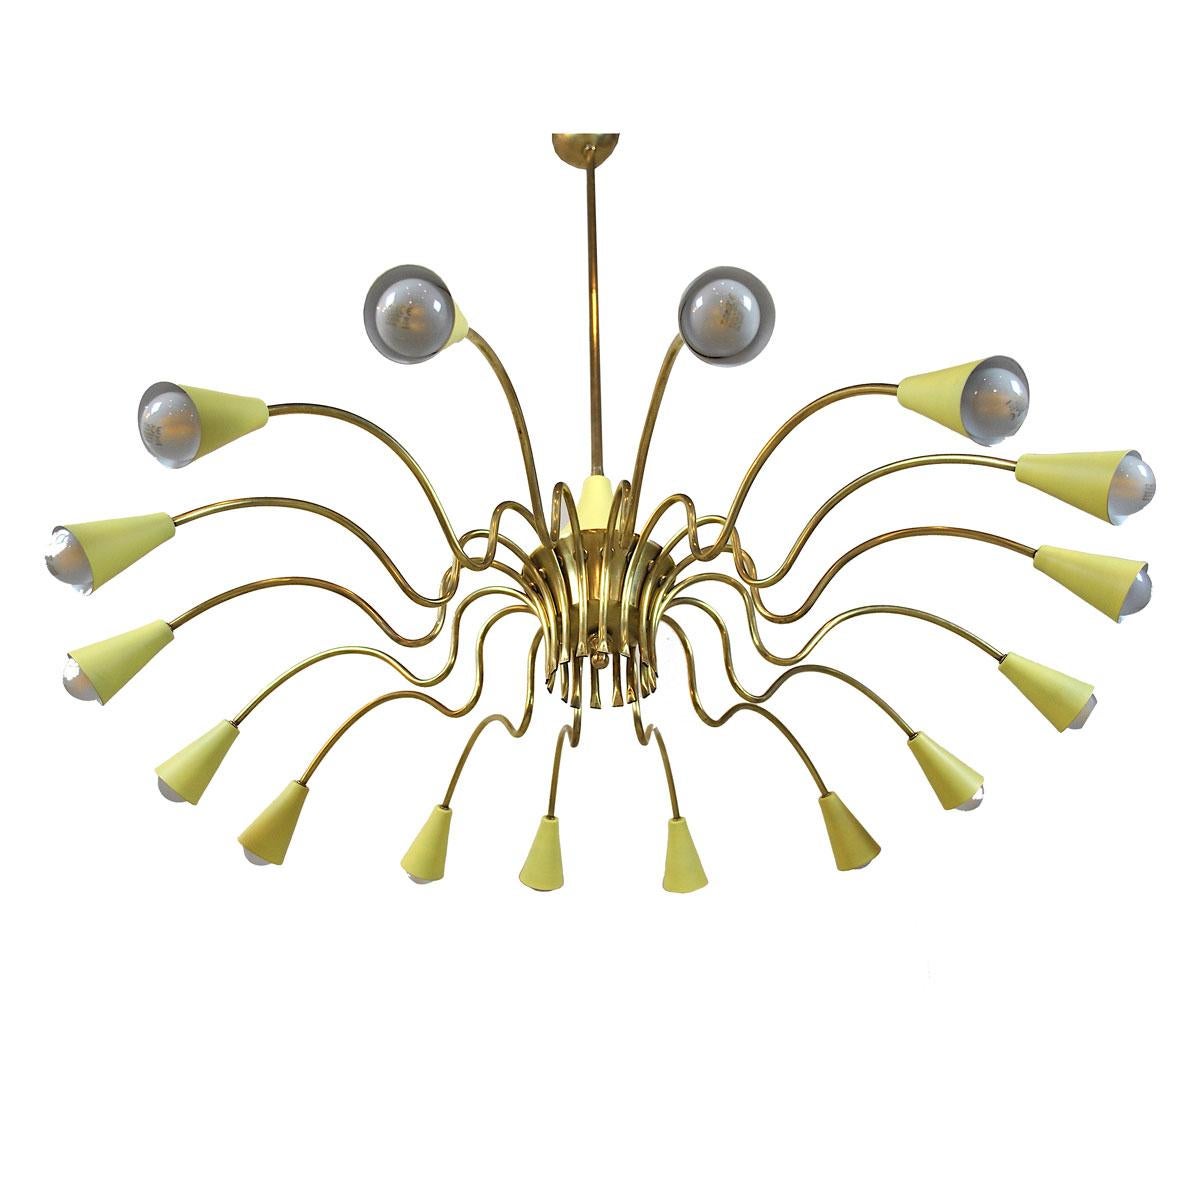 A beautiful suspension chandelier from 1950s by Stilnovo.
Stilnovo was founded in Milan by Bruno Gatta, whose father, Dino, had previously worked alongside Camillo Olivetti - with whom he graduated in Turin - on the creation of CGS in Ivrea. The